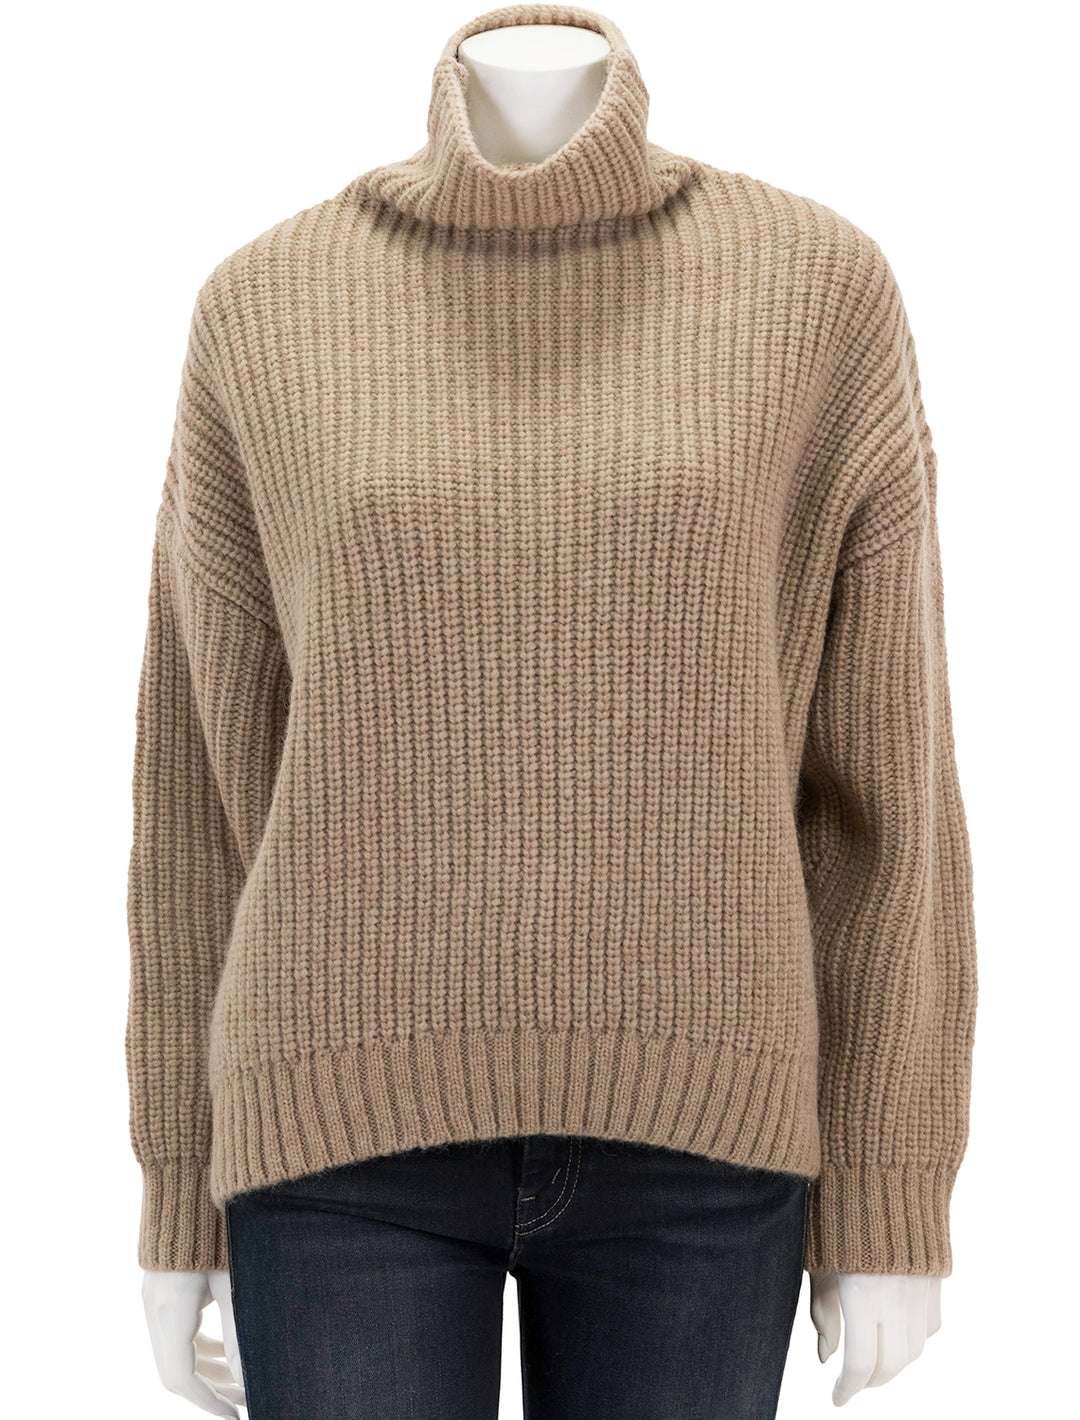 Front view of Anine Bing's sydney sweater in camel.